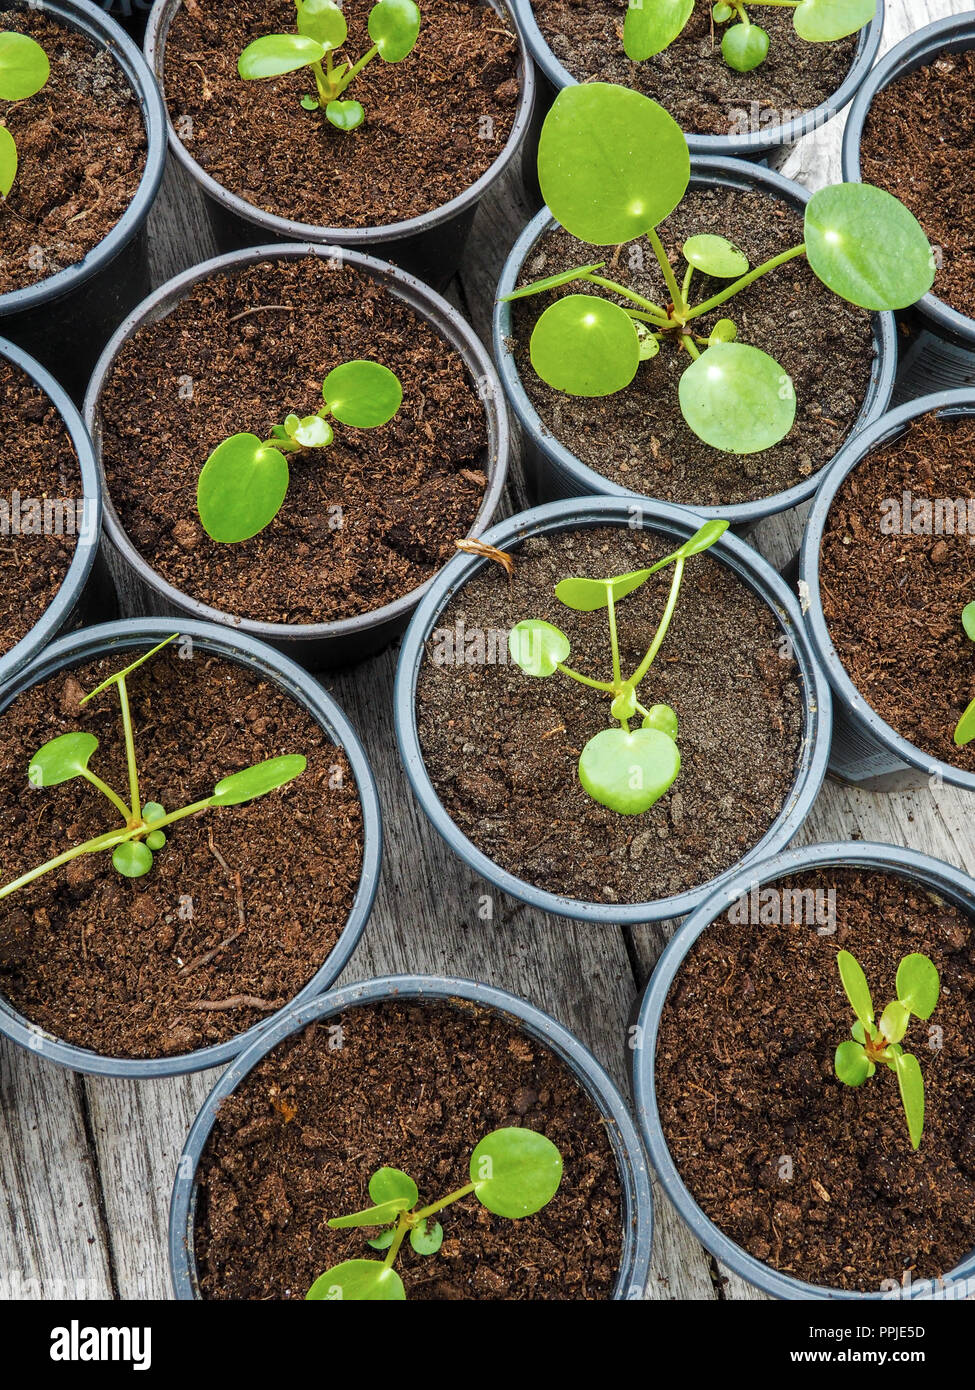 Multiple propagated pancake plant cuttings in black plastic gardening pots on a wooden table Stock Photo